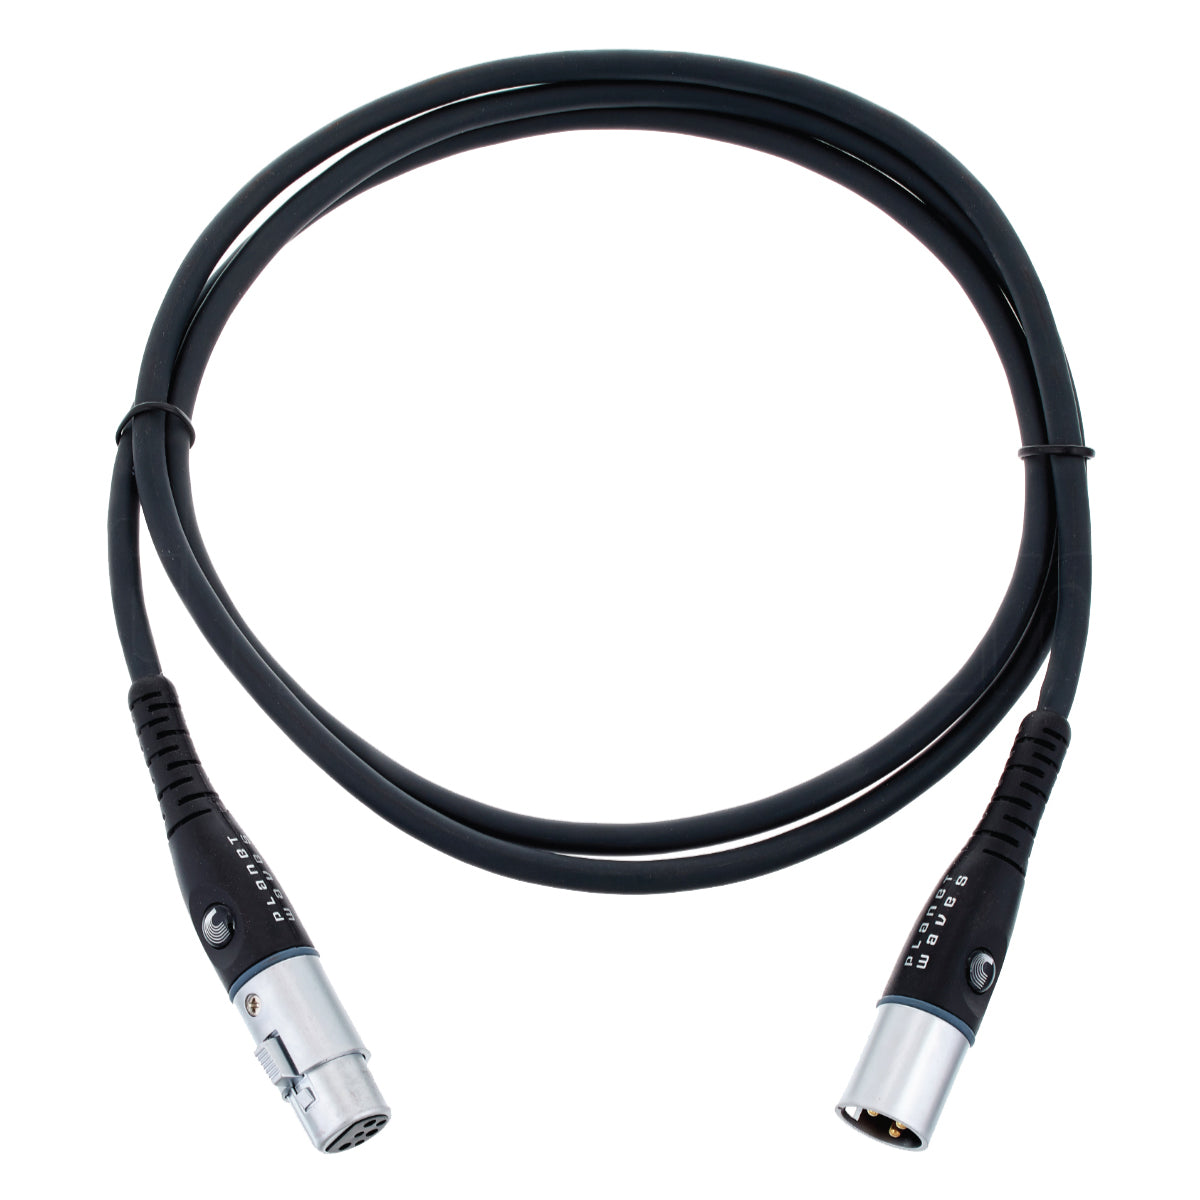 D'ADDARIO Planet Waves PW-M-05 Custom Series Microphone Cable (5, 10, 25 feet)